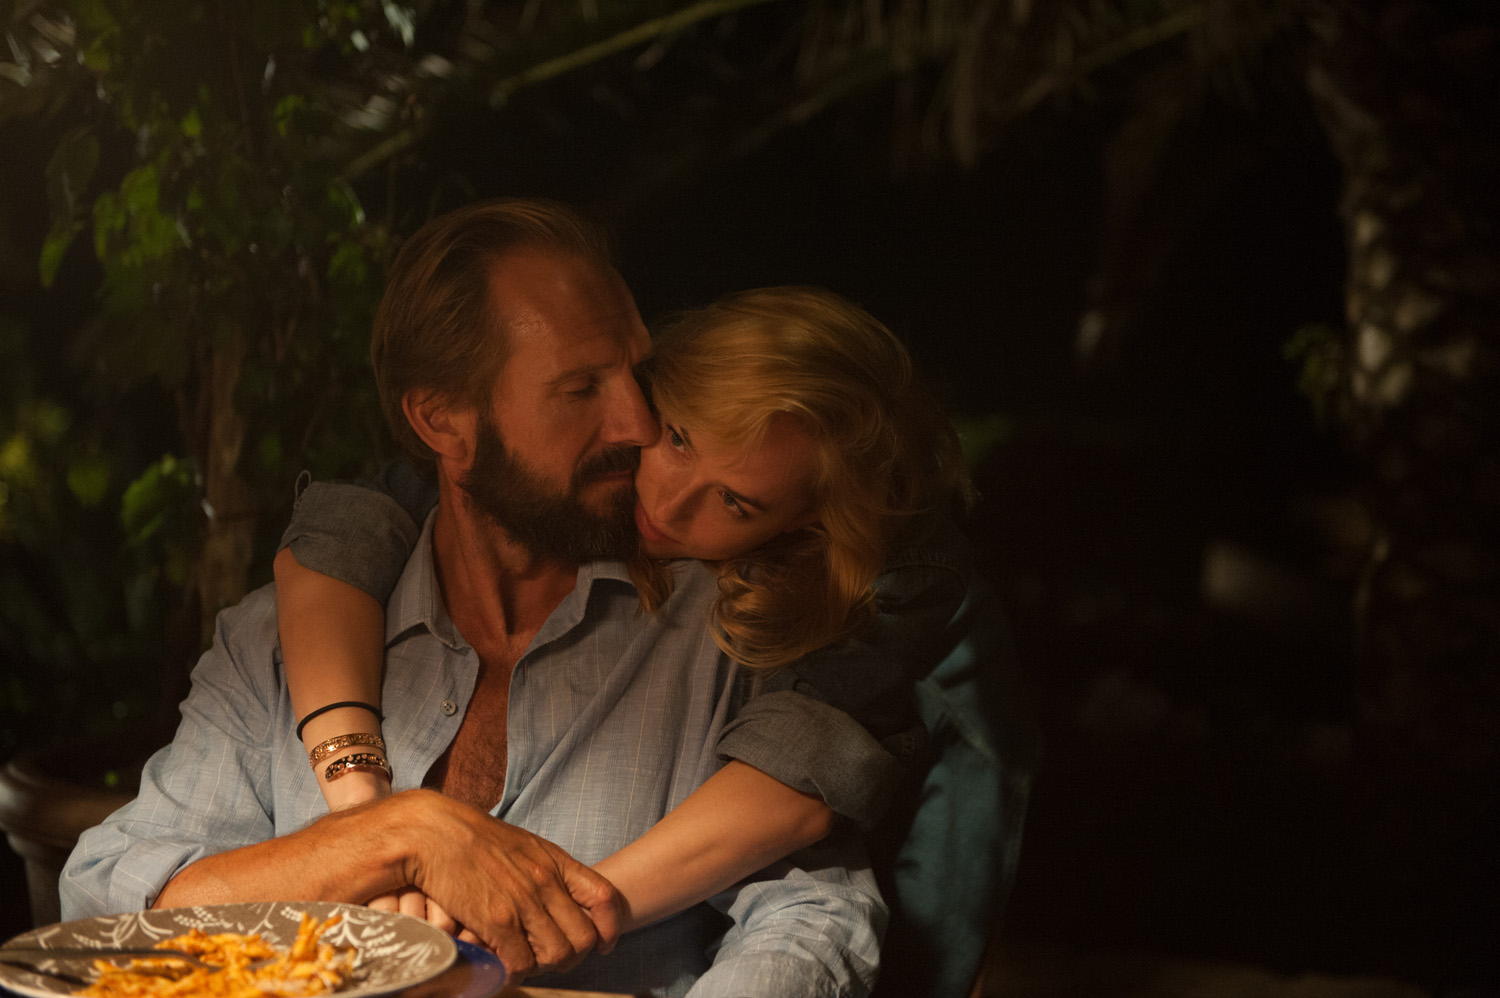 "A Bigger Splash" movie review by Lucas Mirabella